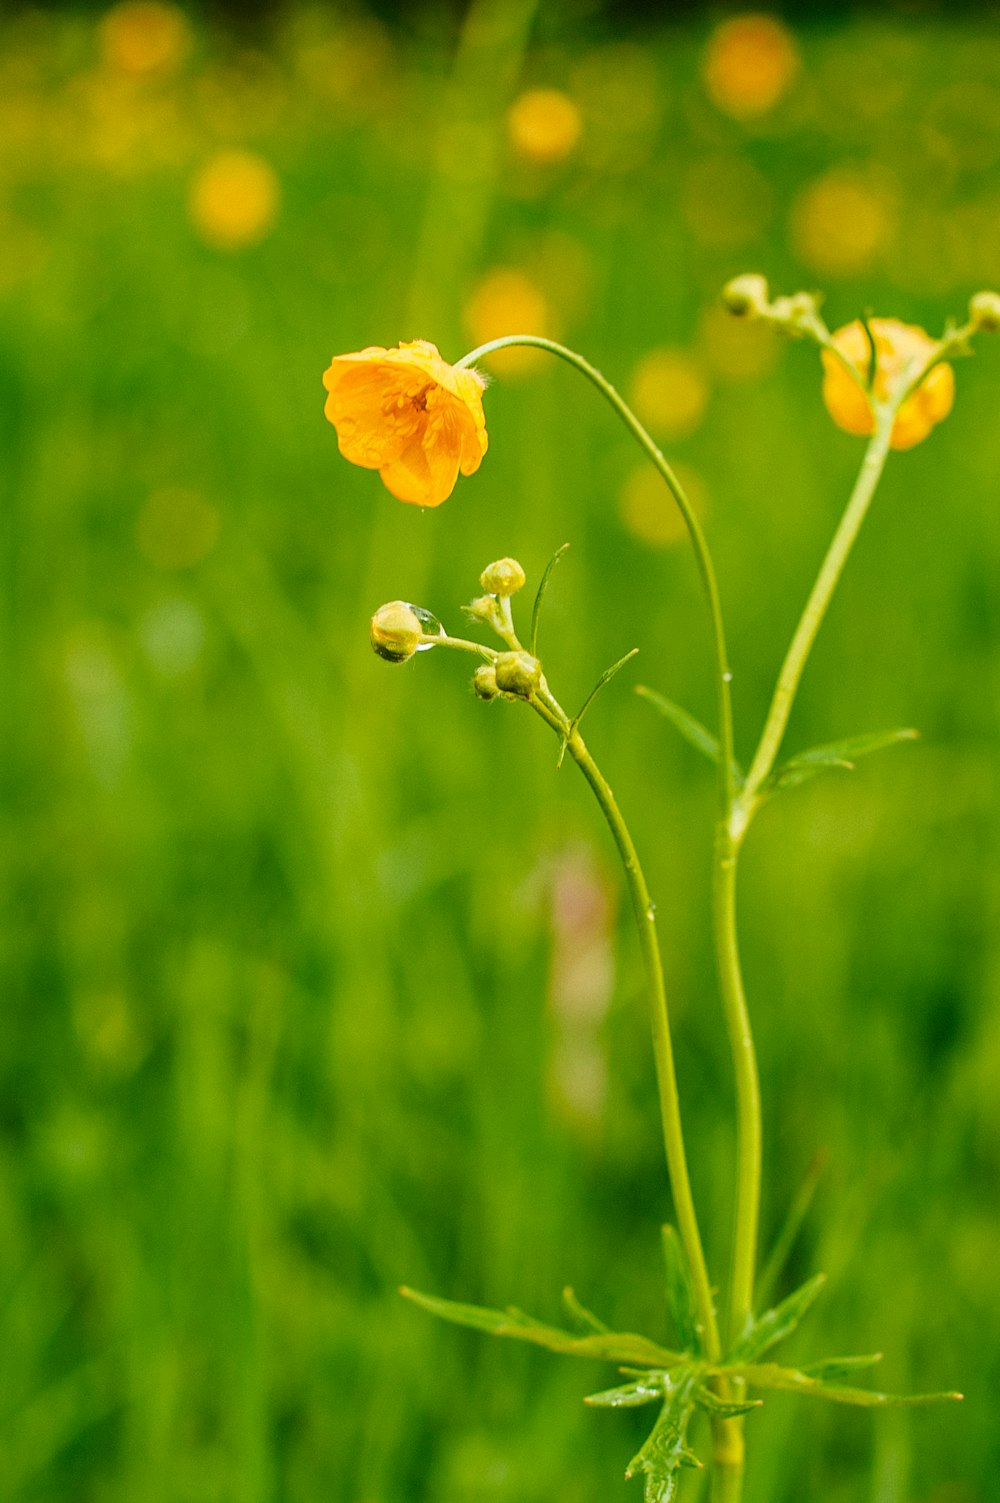 a close up of a flower in a field of grass